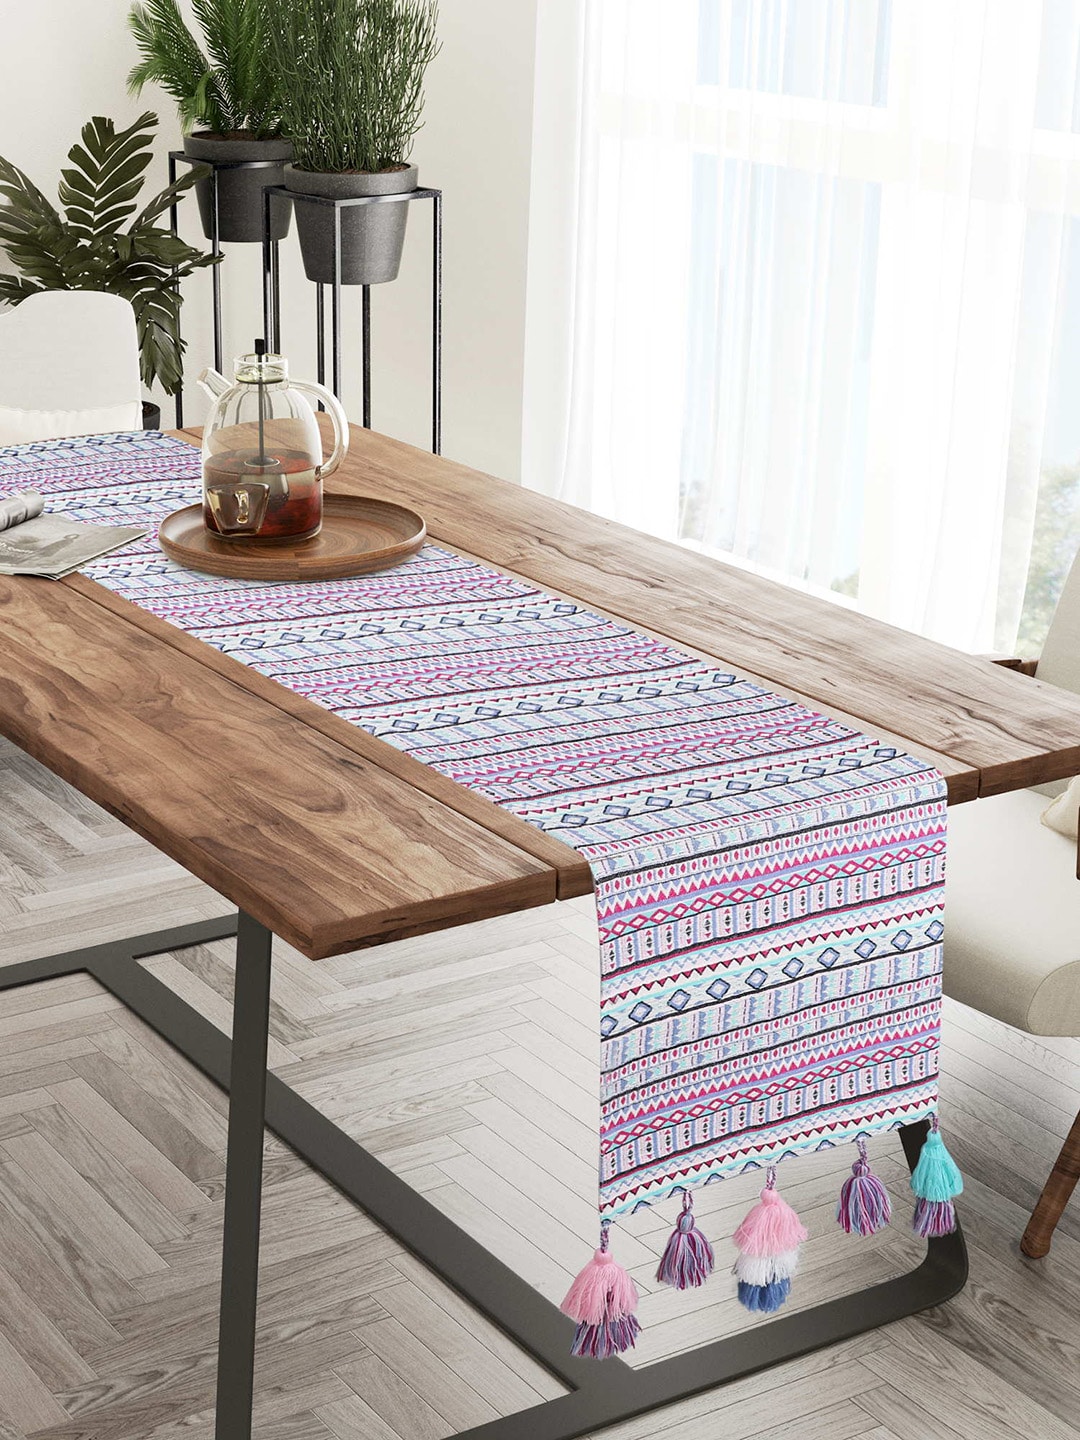 Mezposh 6 Seater Printed Table Runners Price in India